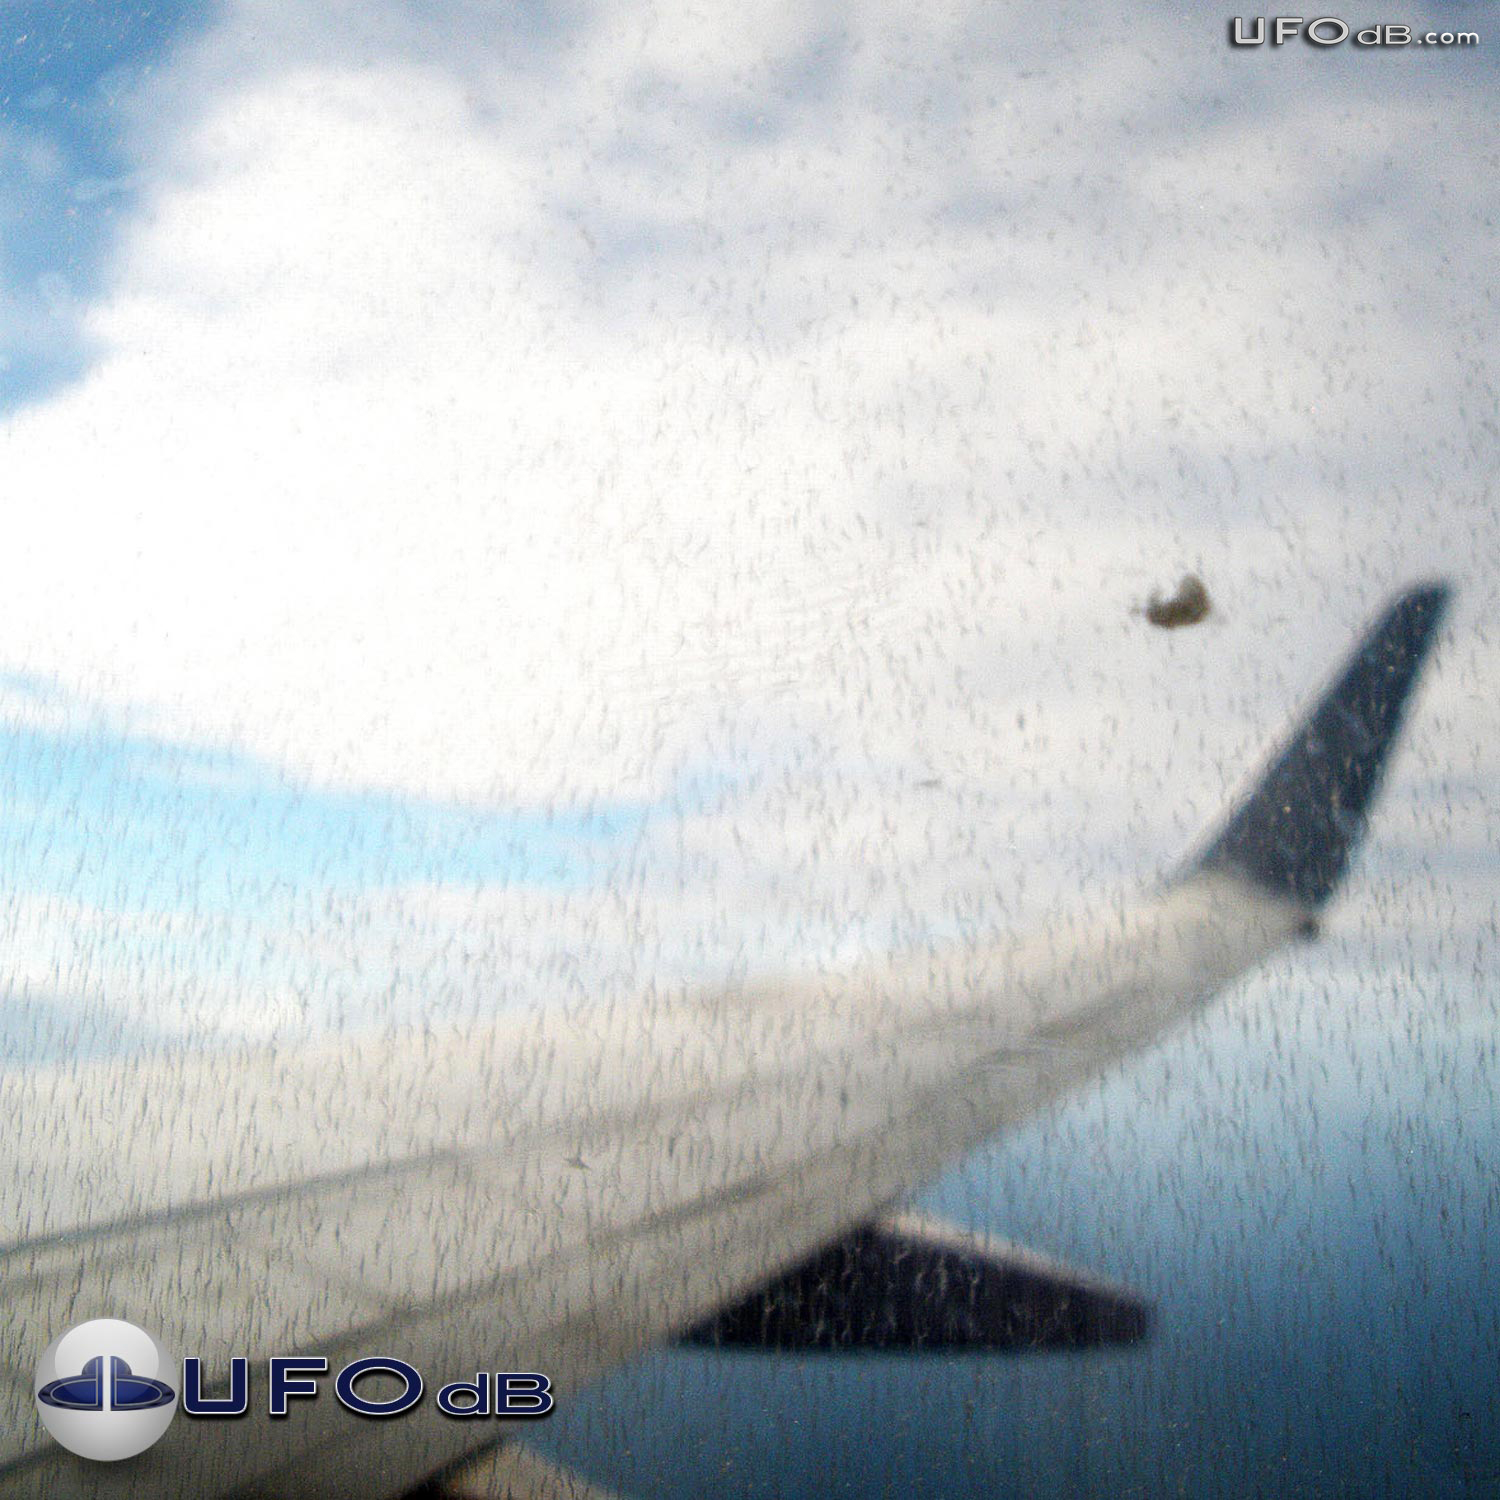 Cloaking UFO near wing of flying Airplane in Australia | January 2011 UFO Picture #243-1